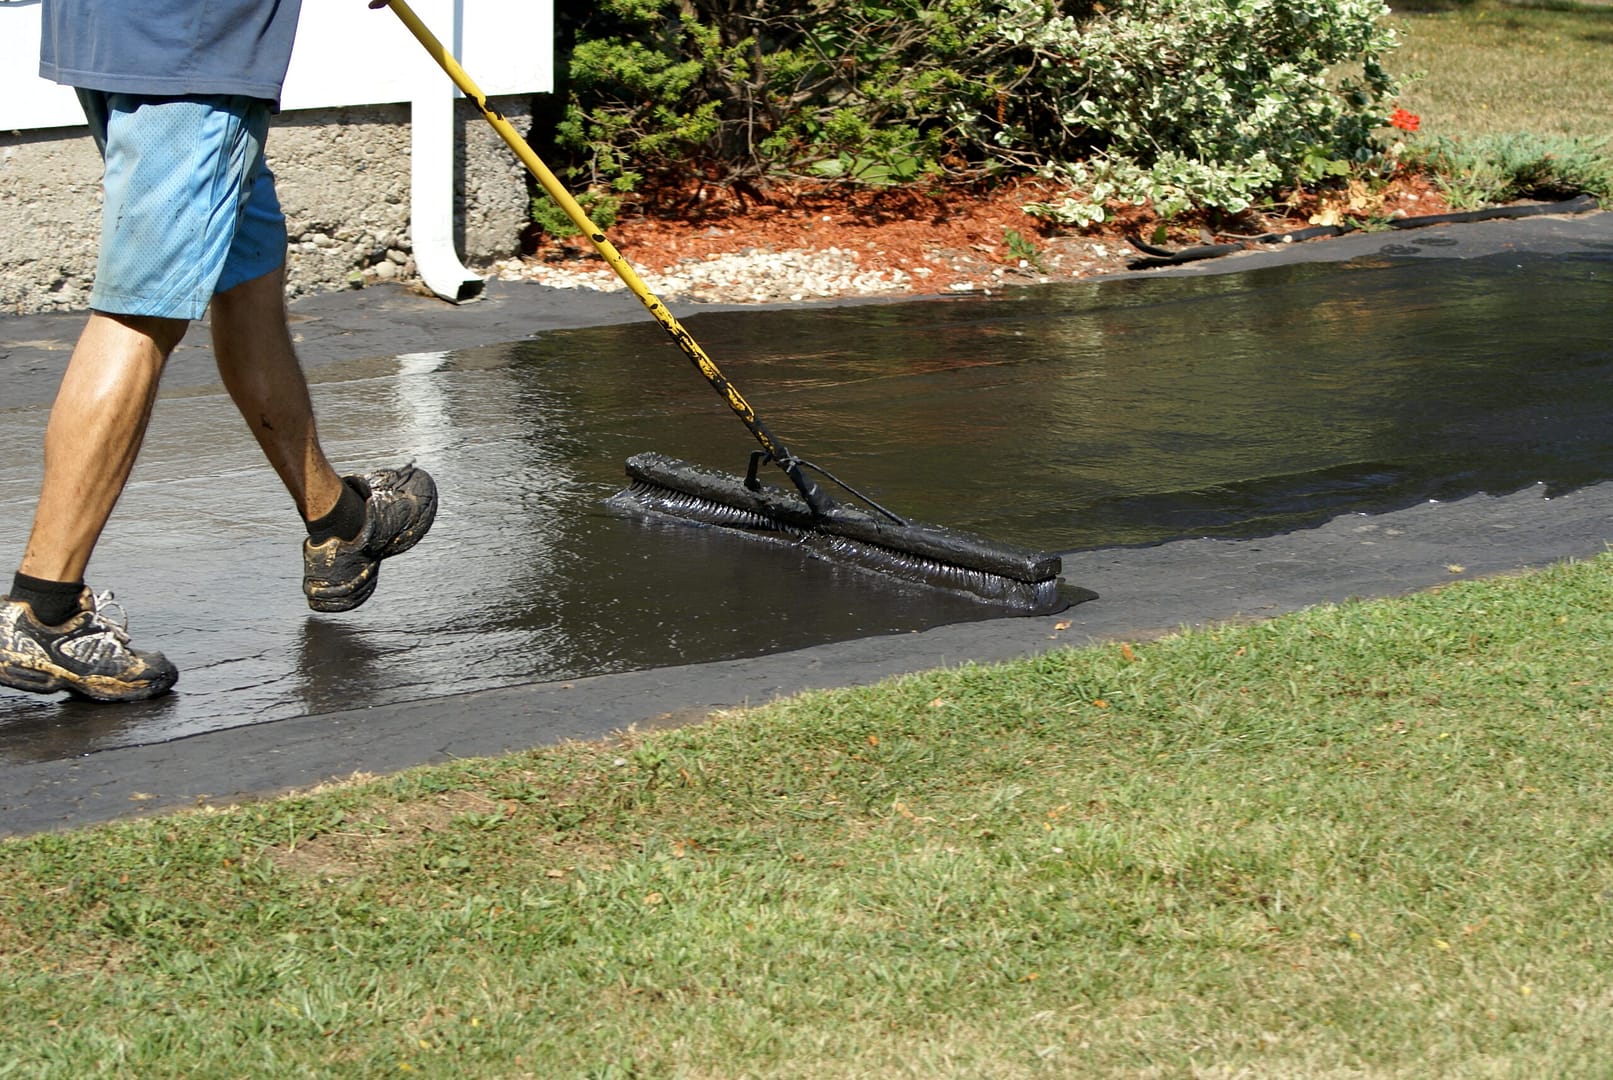 Worker carefully applies a thick coat of black driveway sealer to the asphalt surface, ensuring a smooth and protective finish.